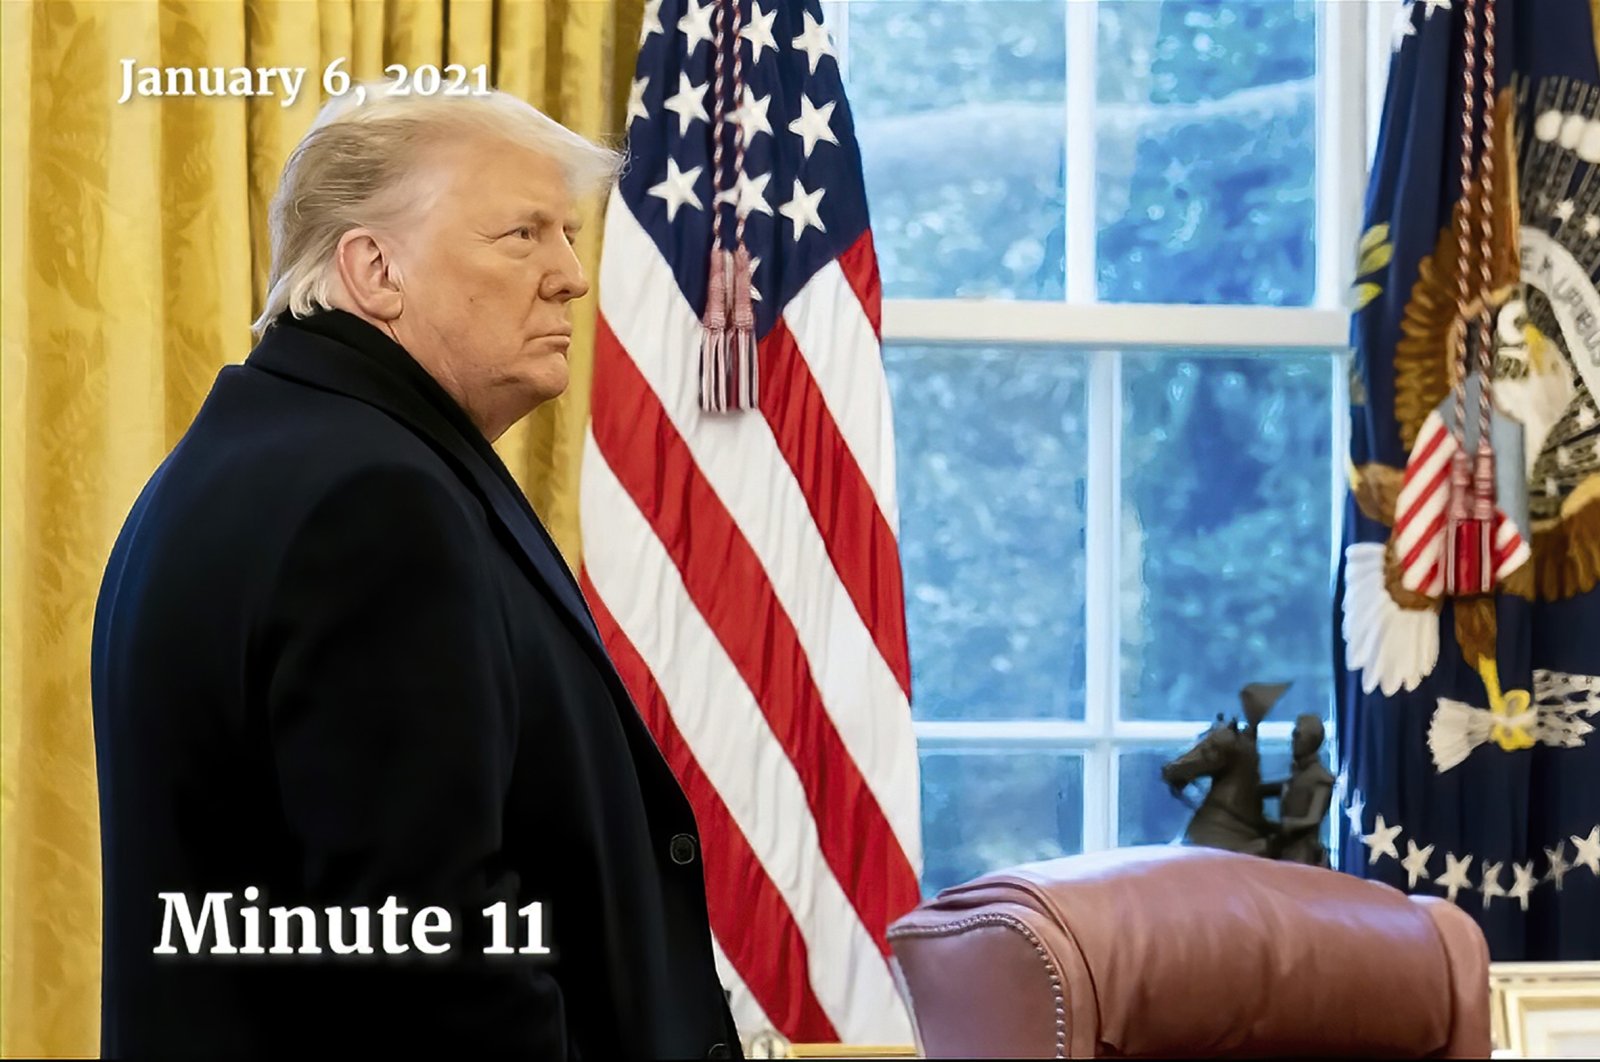 This exhibit from video shows a photo of U.S. President Donald Trump as he arrived at the Oval Office after his speech at the rally on the Ellipse on Jan. 6, displayed at a hearing by the House select committee investigating the Jan. 6 attack on the U.S. Capitol, Washington, U.S., July 21, 2022. (House Select Committee via AP)